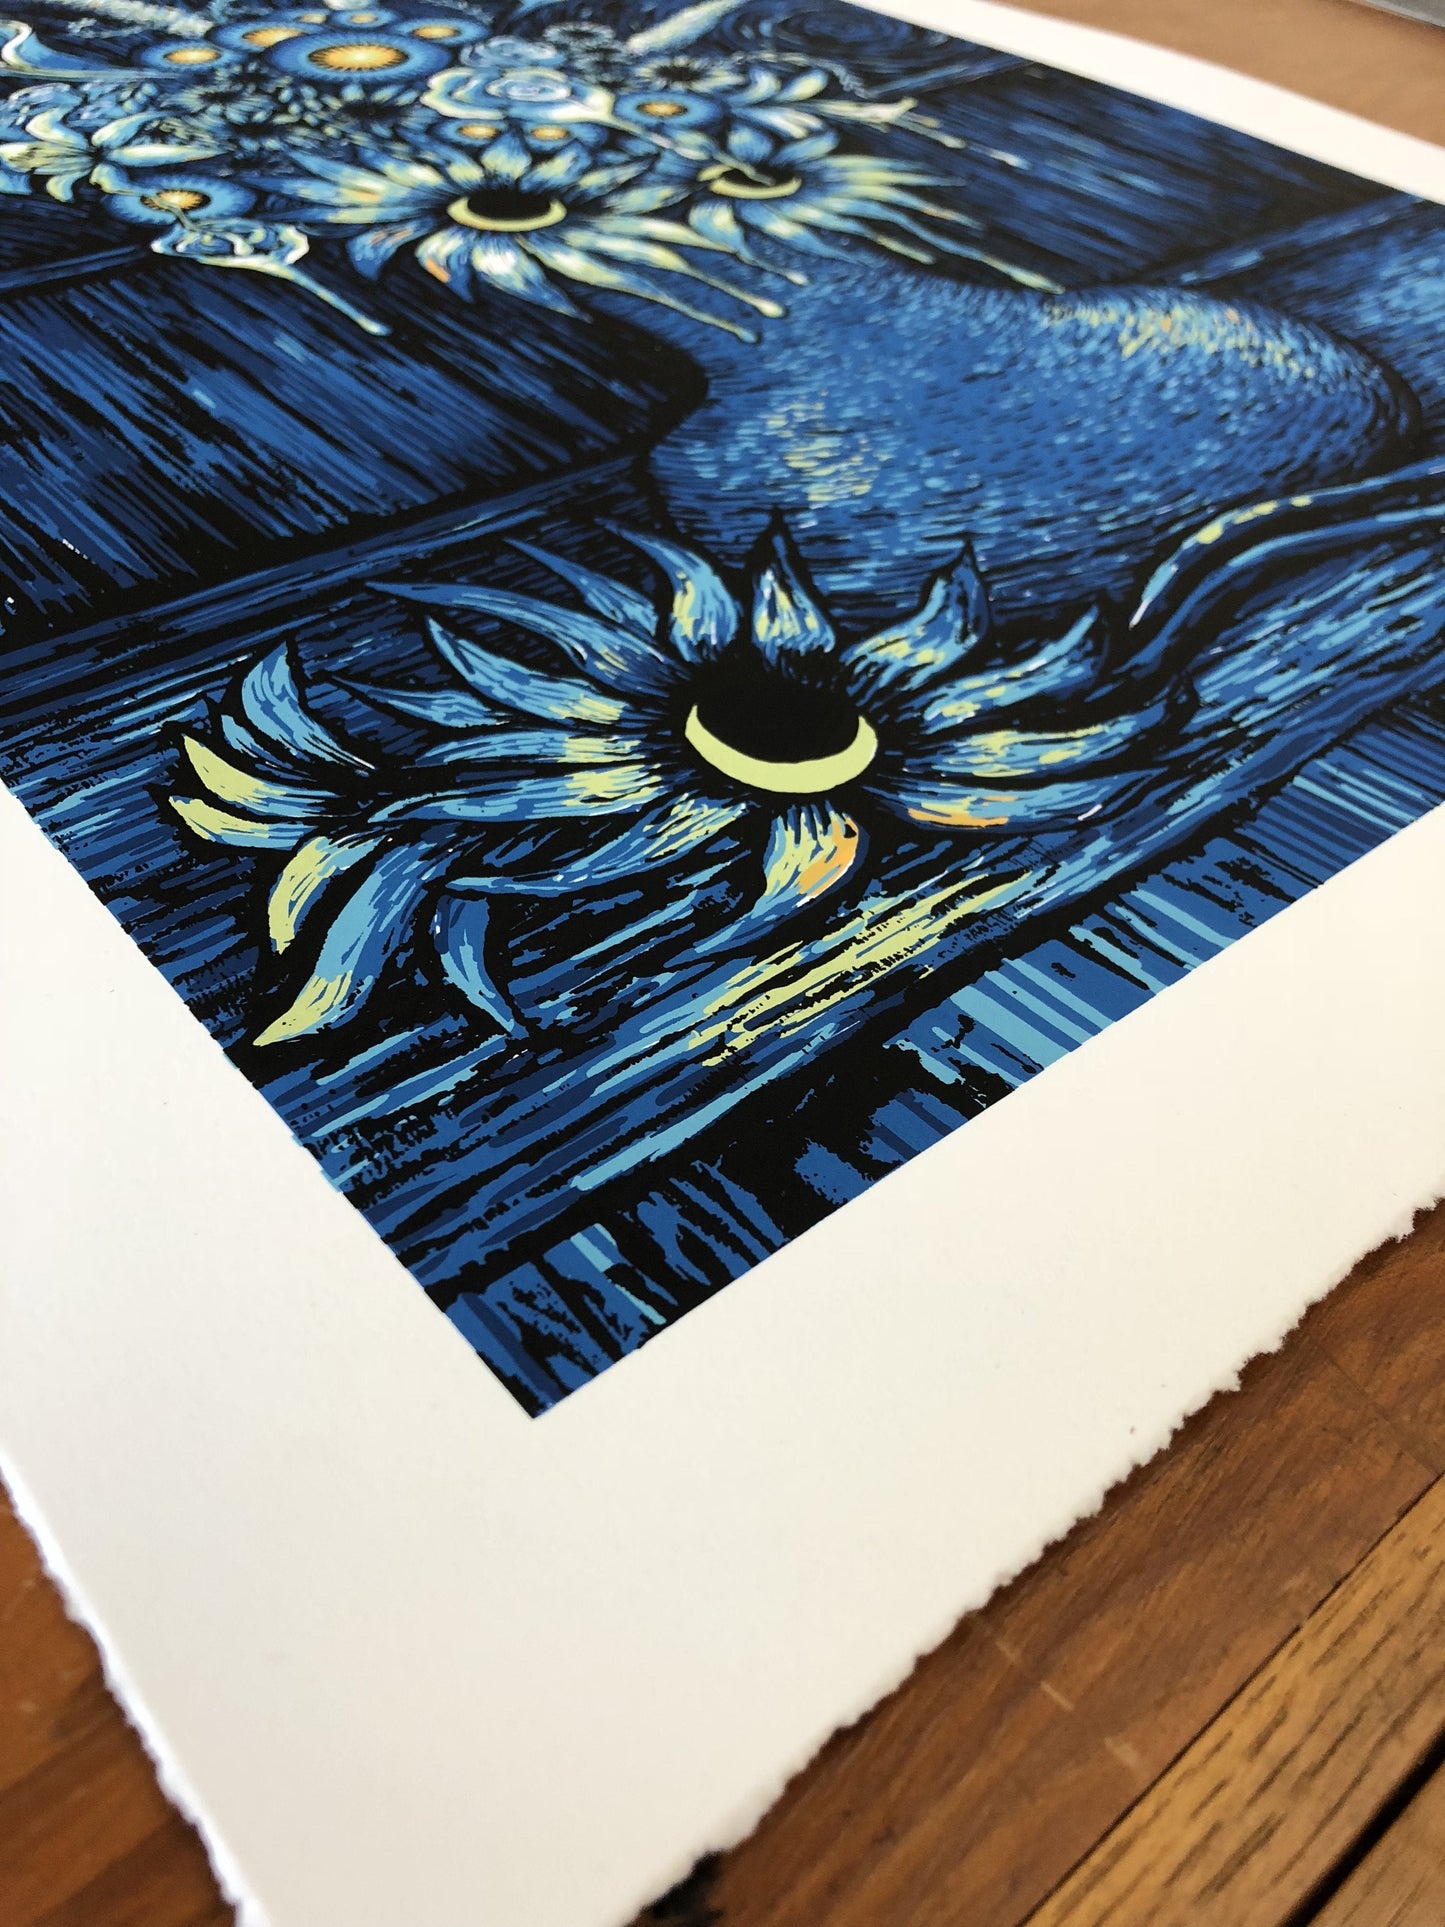 Moonflowers for Time Travelers (MP) Print James R. Eads 